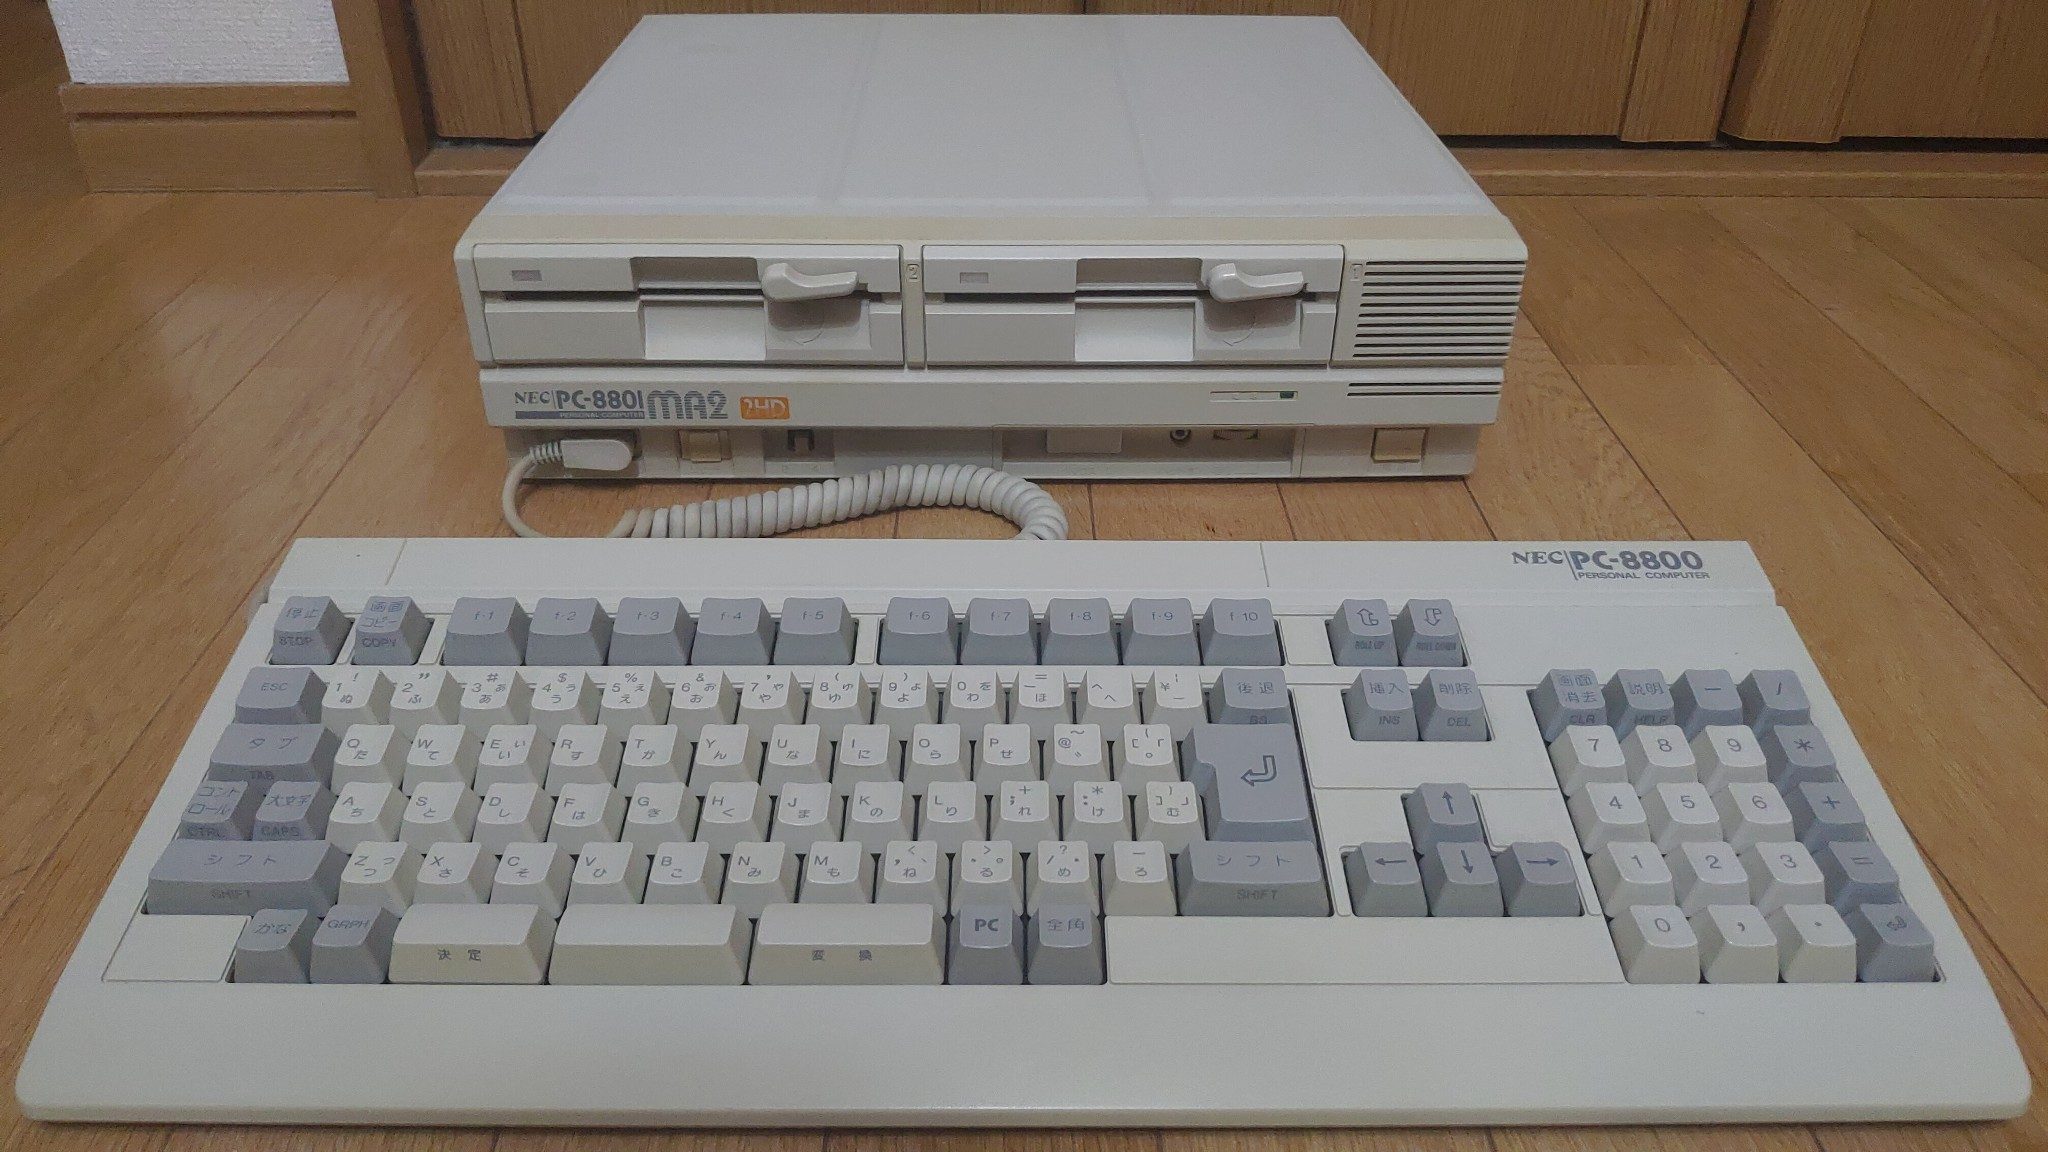 PC/タブレット デスクトップ型PC NEC PC-8801MA2 – Japanese Vintage Computer Collection